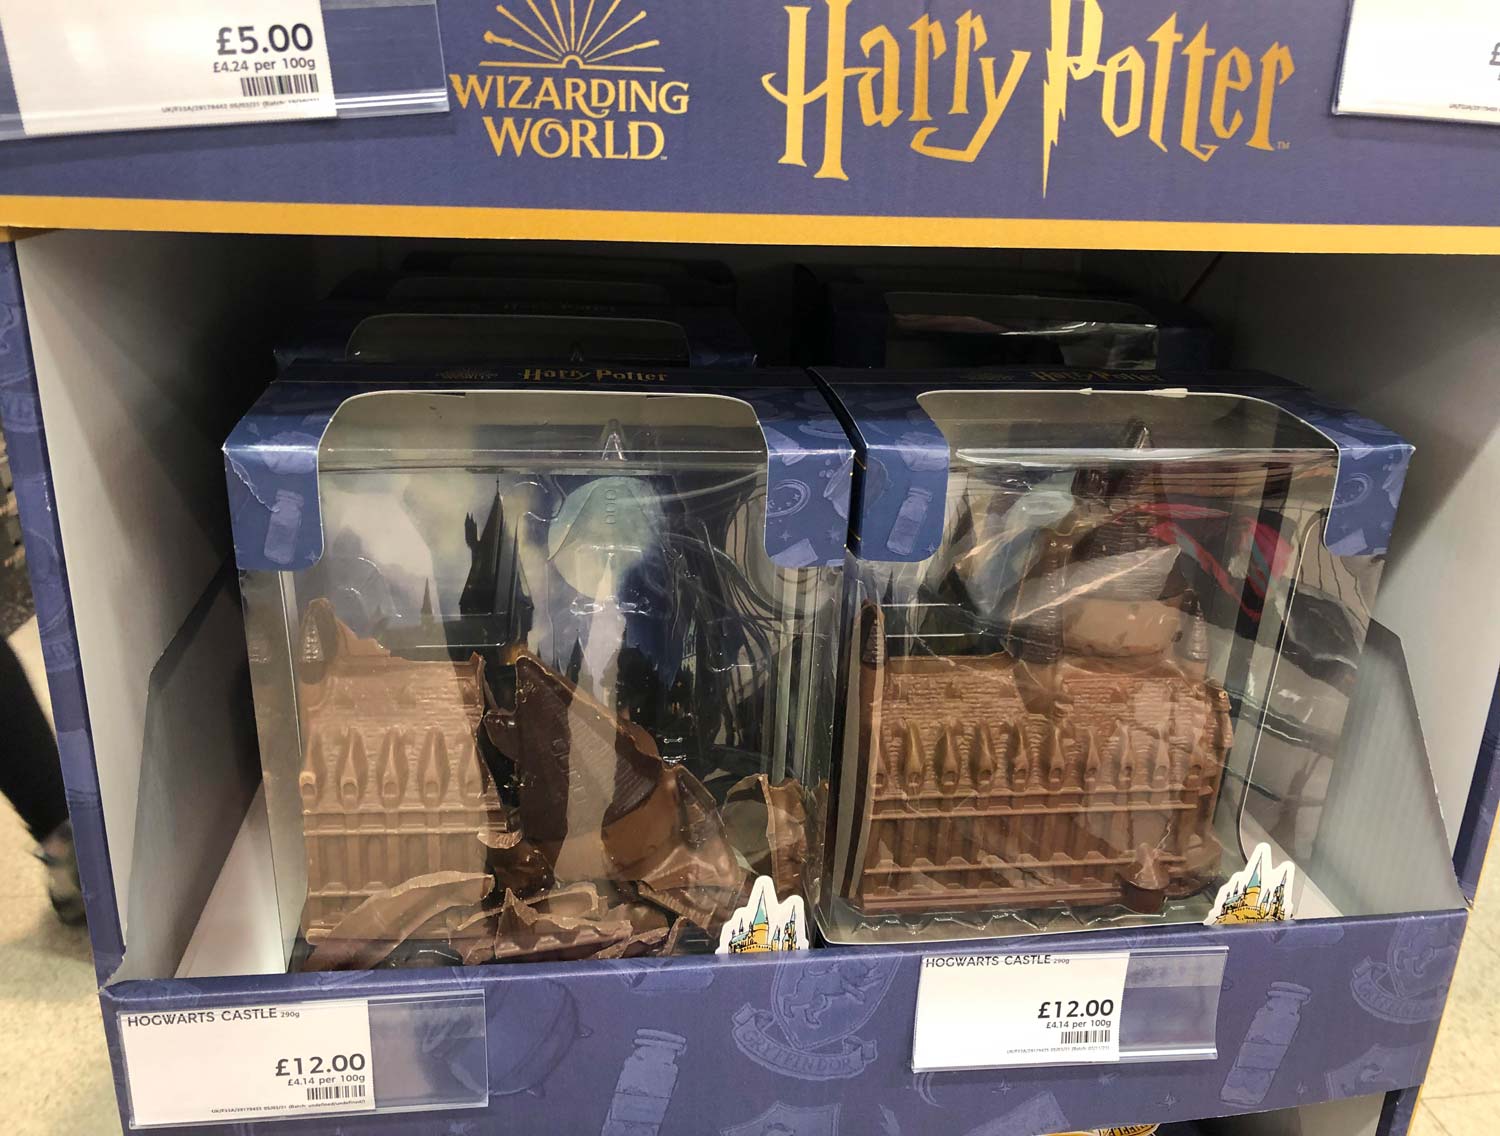 Supermarket selling chocolate Hogwarts, before and after Voldemort!